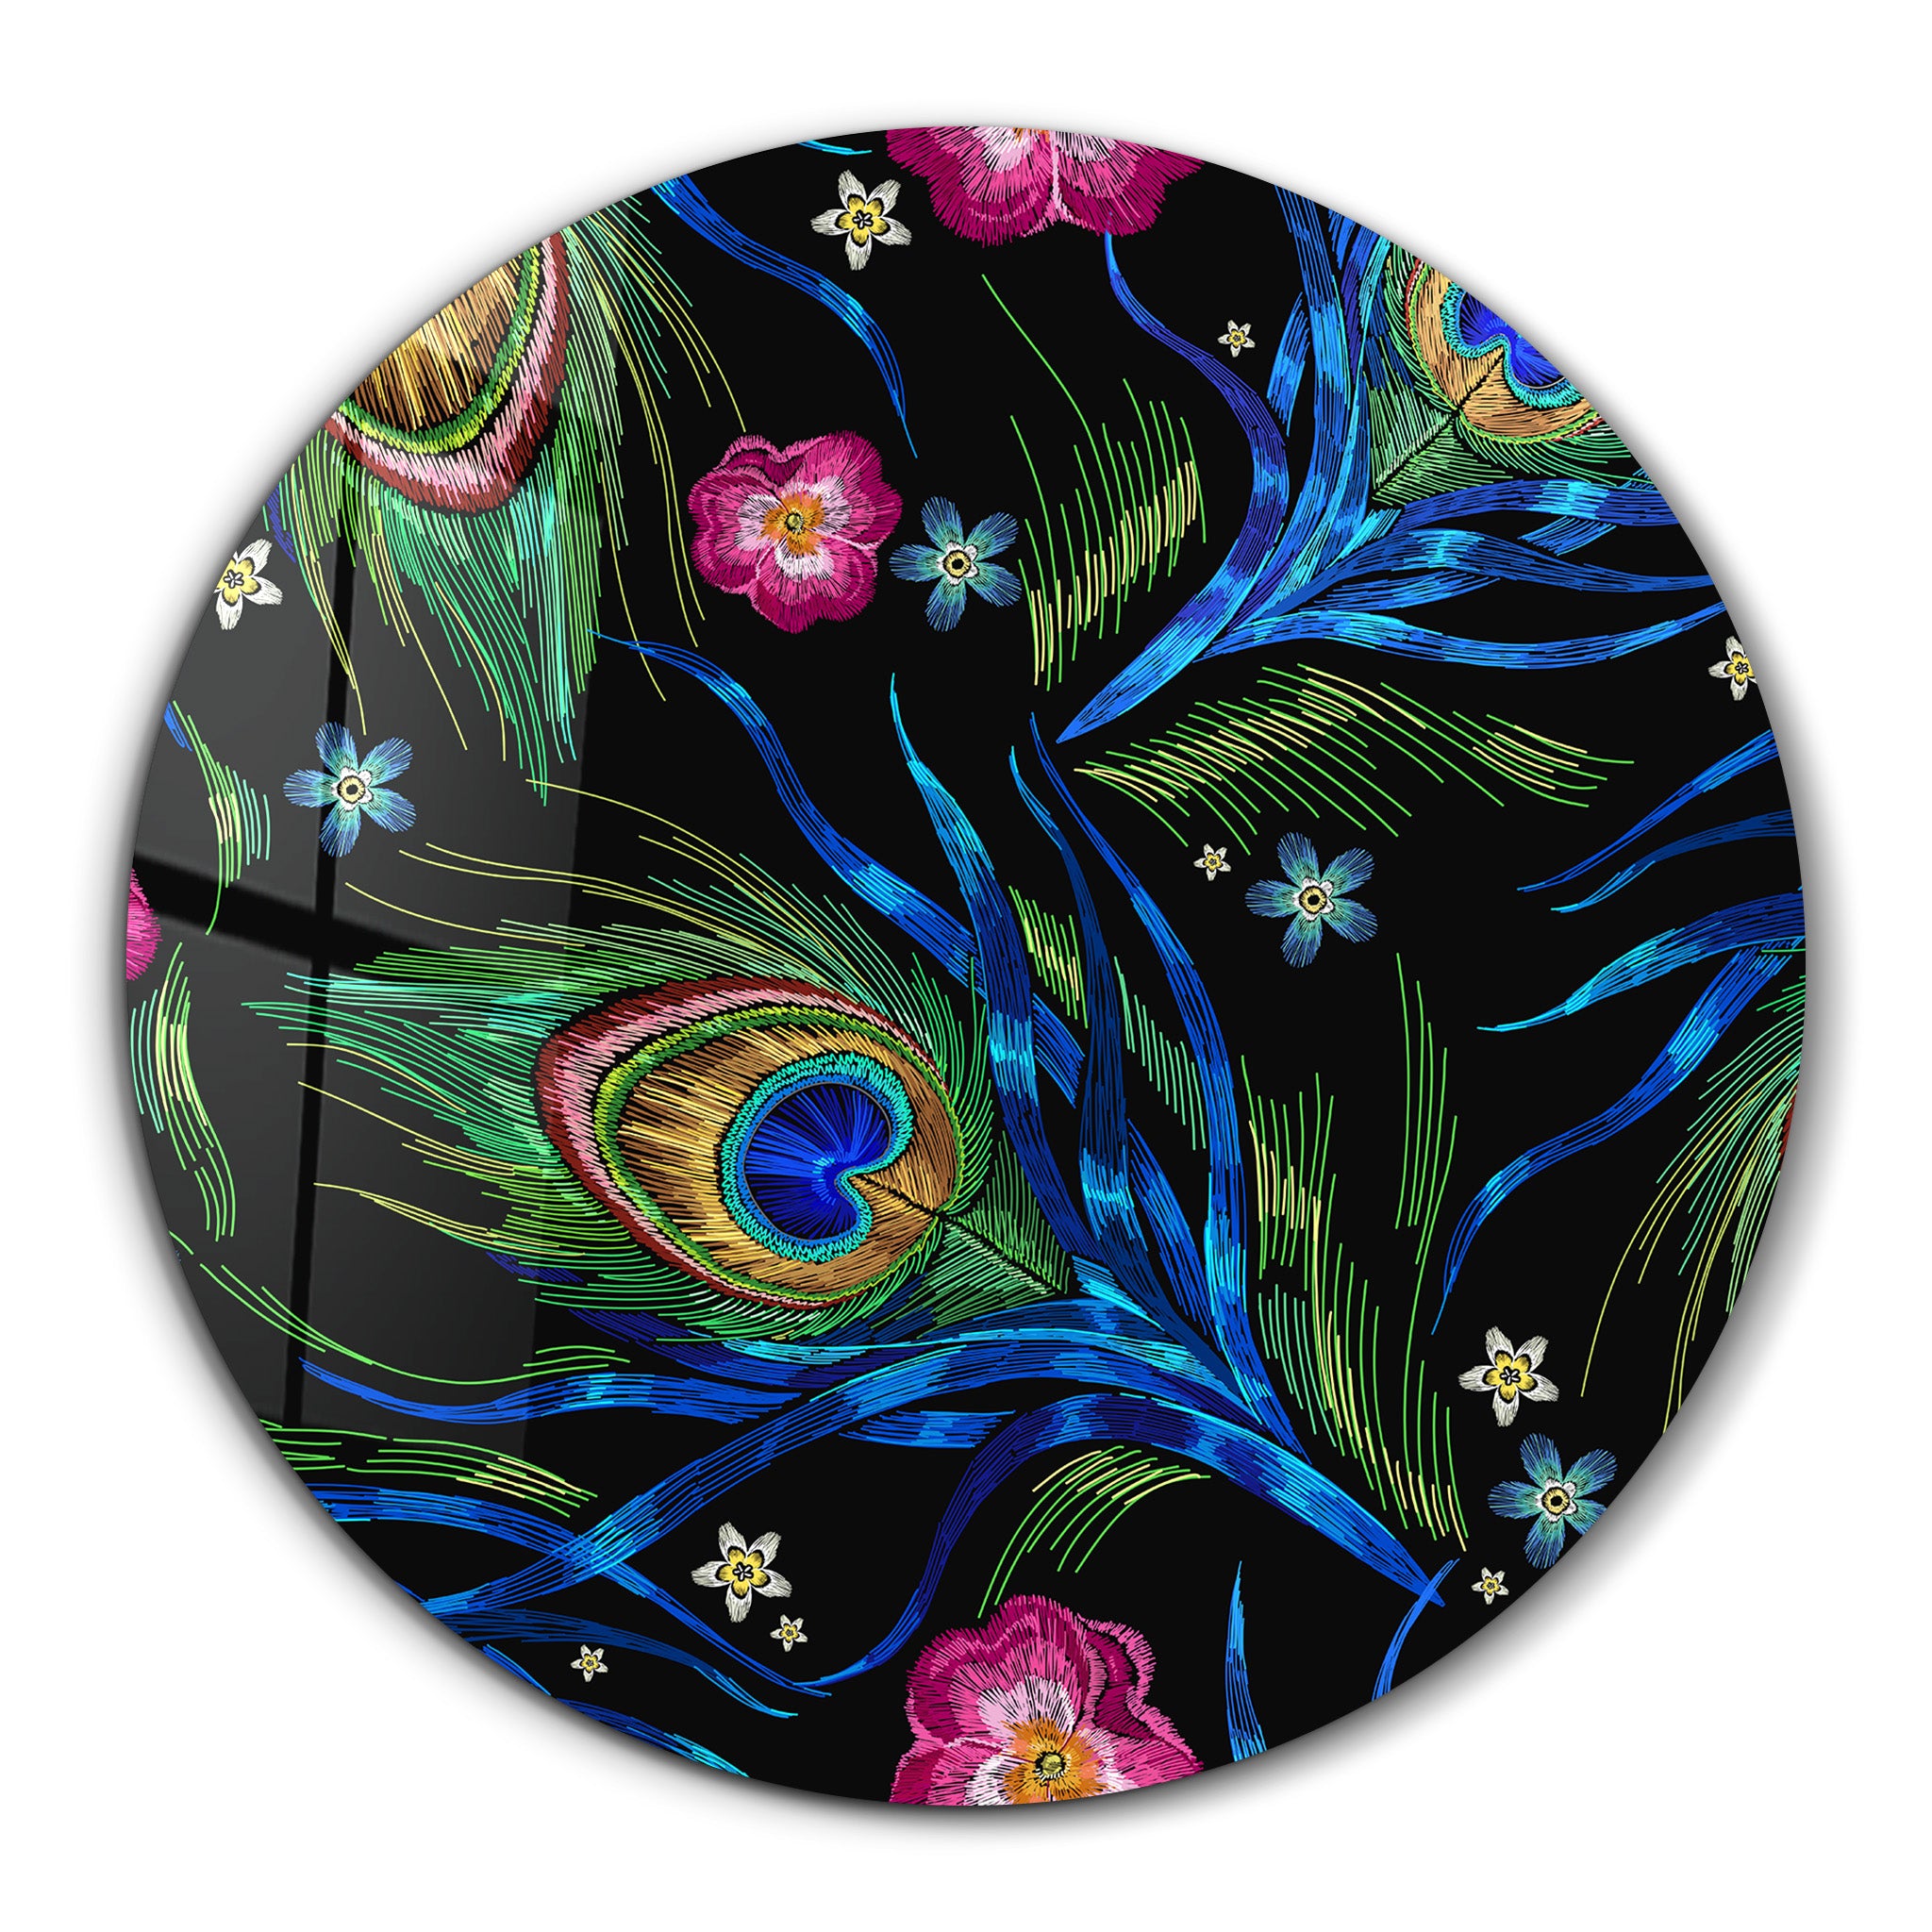 ・"Peacock"・Rounded Glass Wall Art